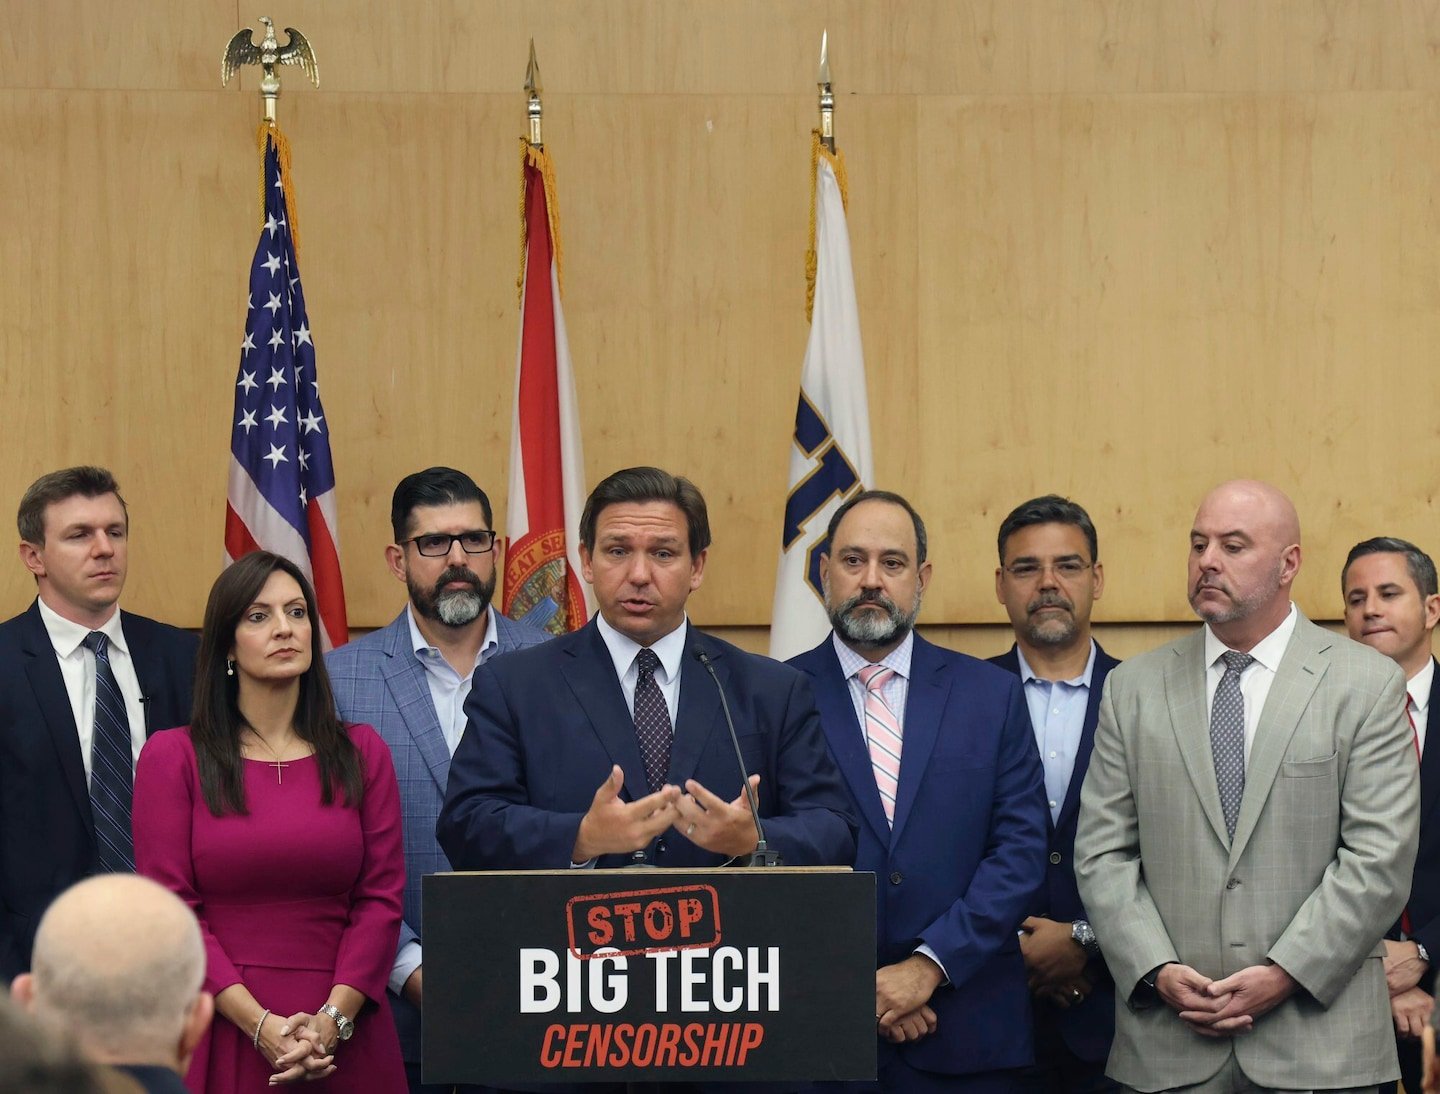 The Technology 202: Tech groups criticize Florida's social media law as unconstitutional, setting the stage for legal action